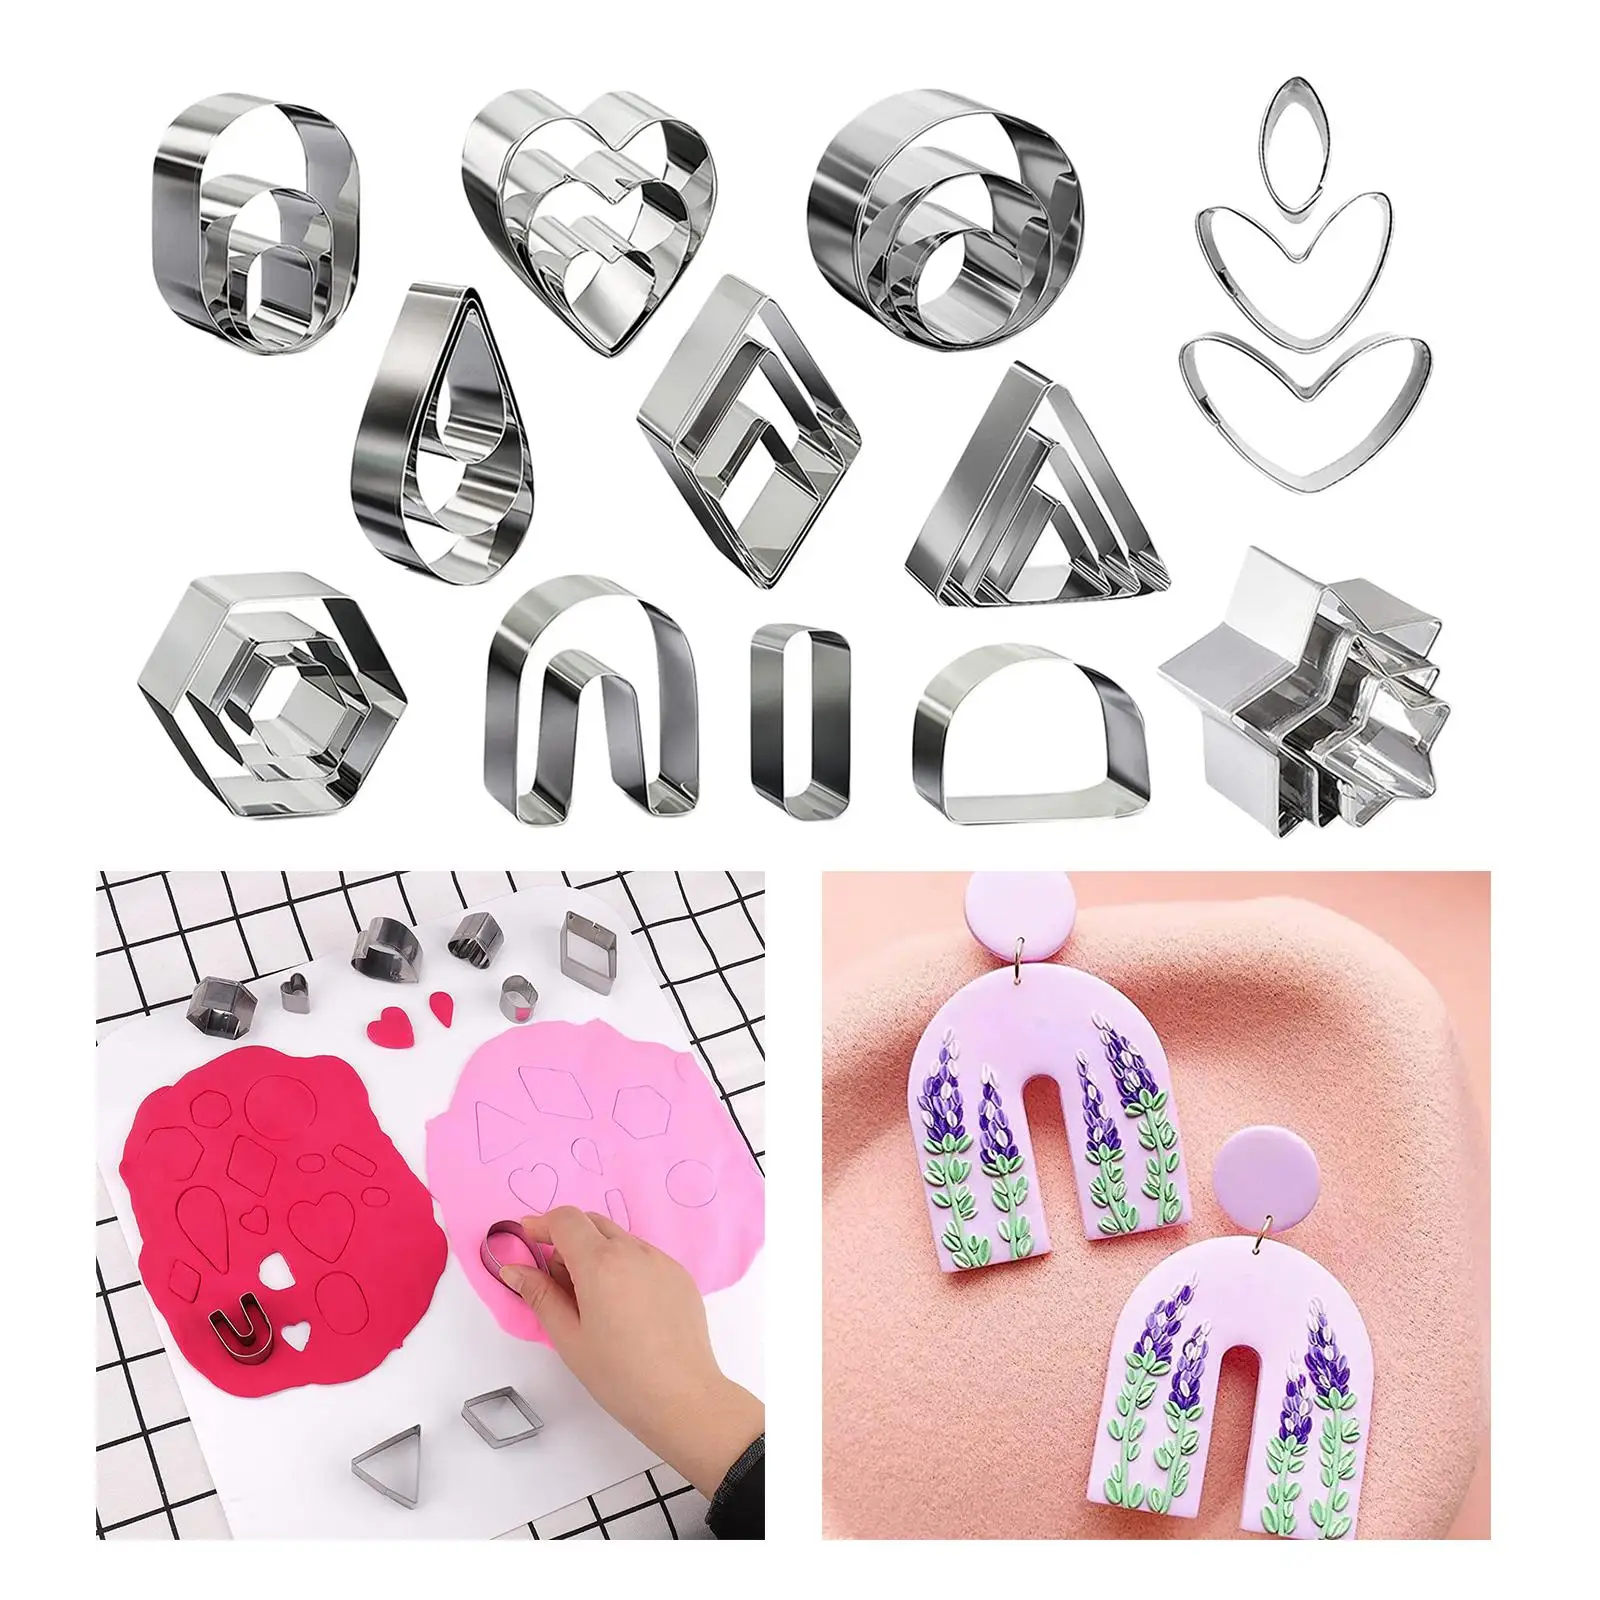 18 Pieces Polymer Clay   Polymer Clay Jewelry Earrings Kids Clay Tools